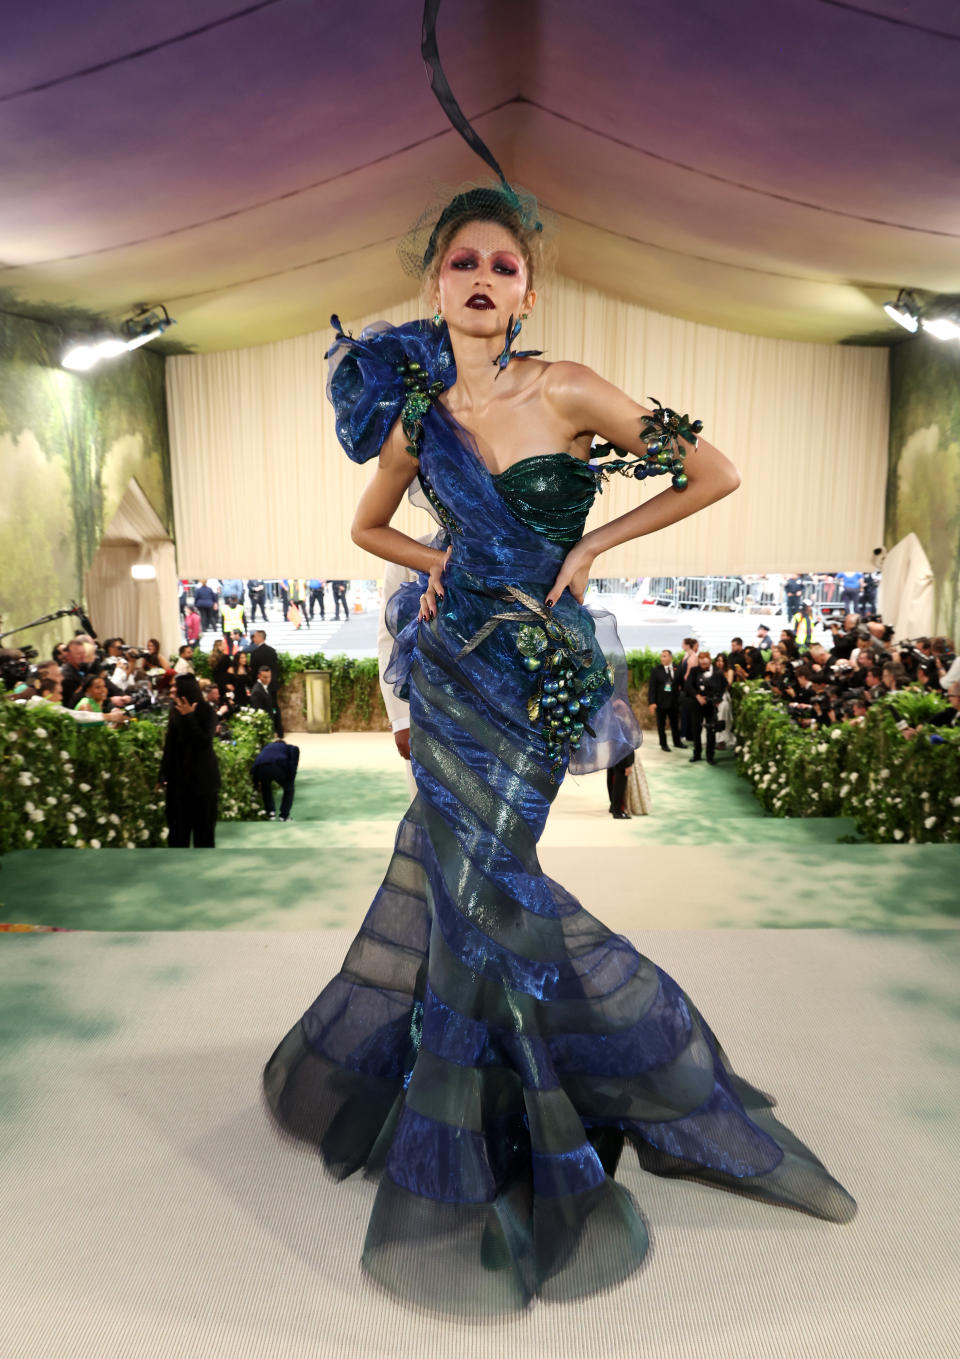 Zendaya in elaborate blue-toned gown with ruffled details and headpiece, posing on a staircase at an event